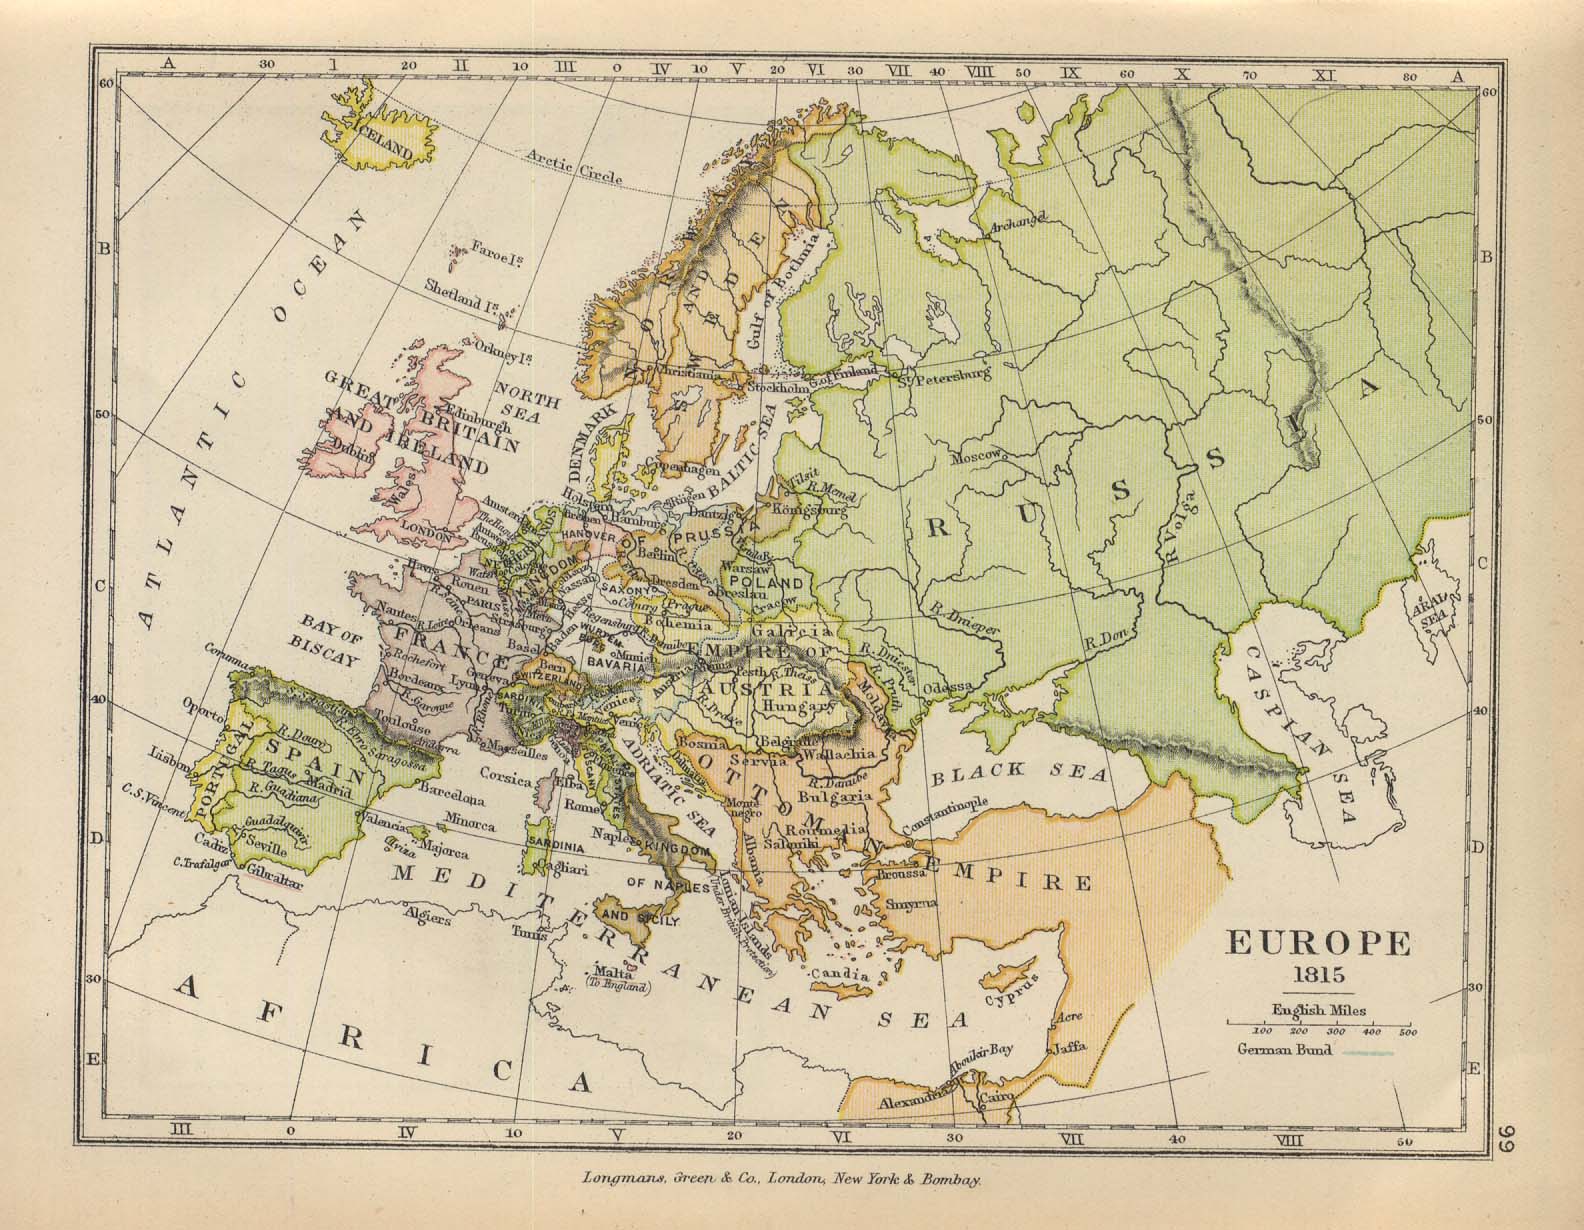 Historical Map of Balkan Europe 1815 [includes Balkans] (294K)
From 'The Public Schools Historical Atlas' edited by C. Colbeck, published by Longmans, Green, and Co., 1905. 